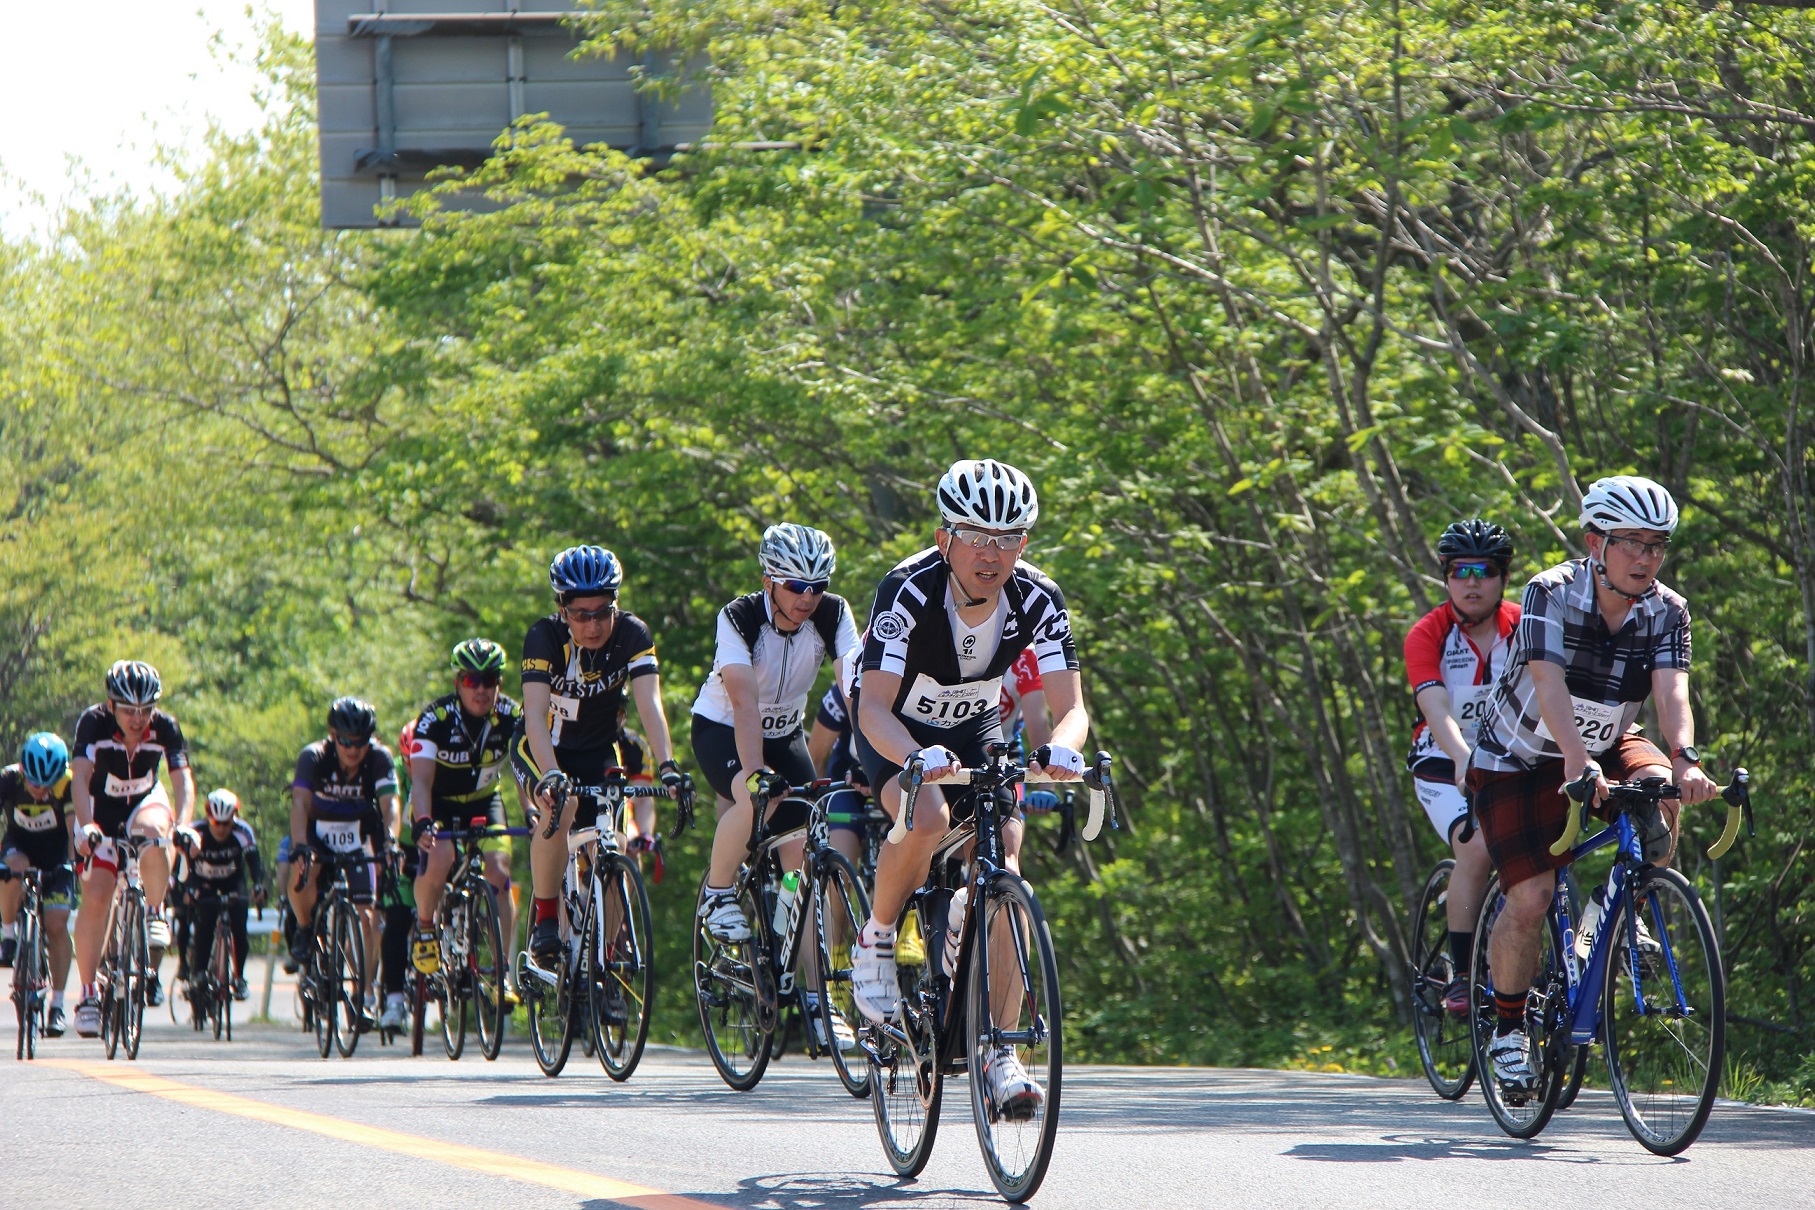 A must check for cyclist! Bike road race in the mountains “Nihon-no-Zao Hill Climb Eco”